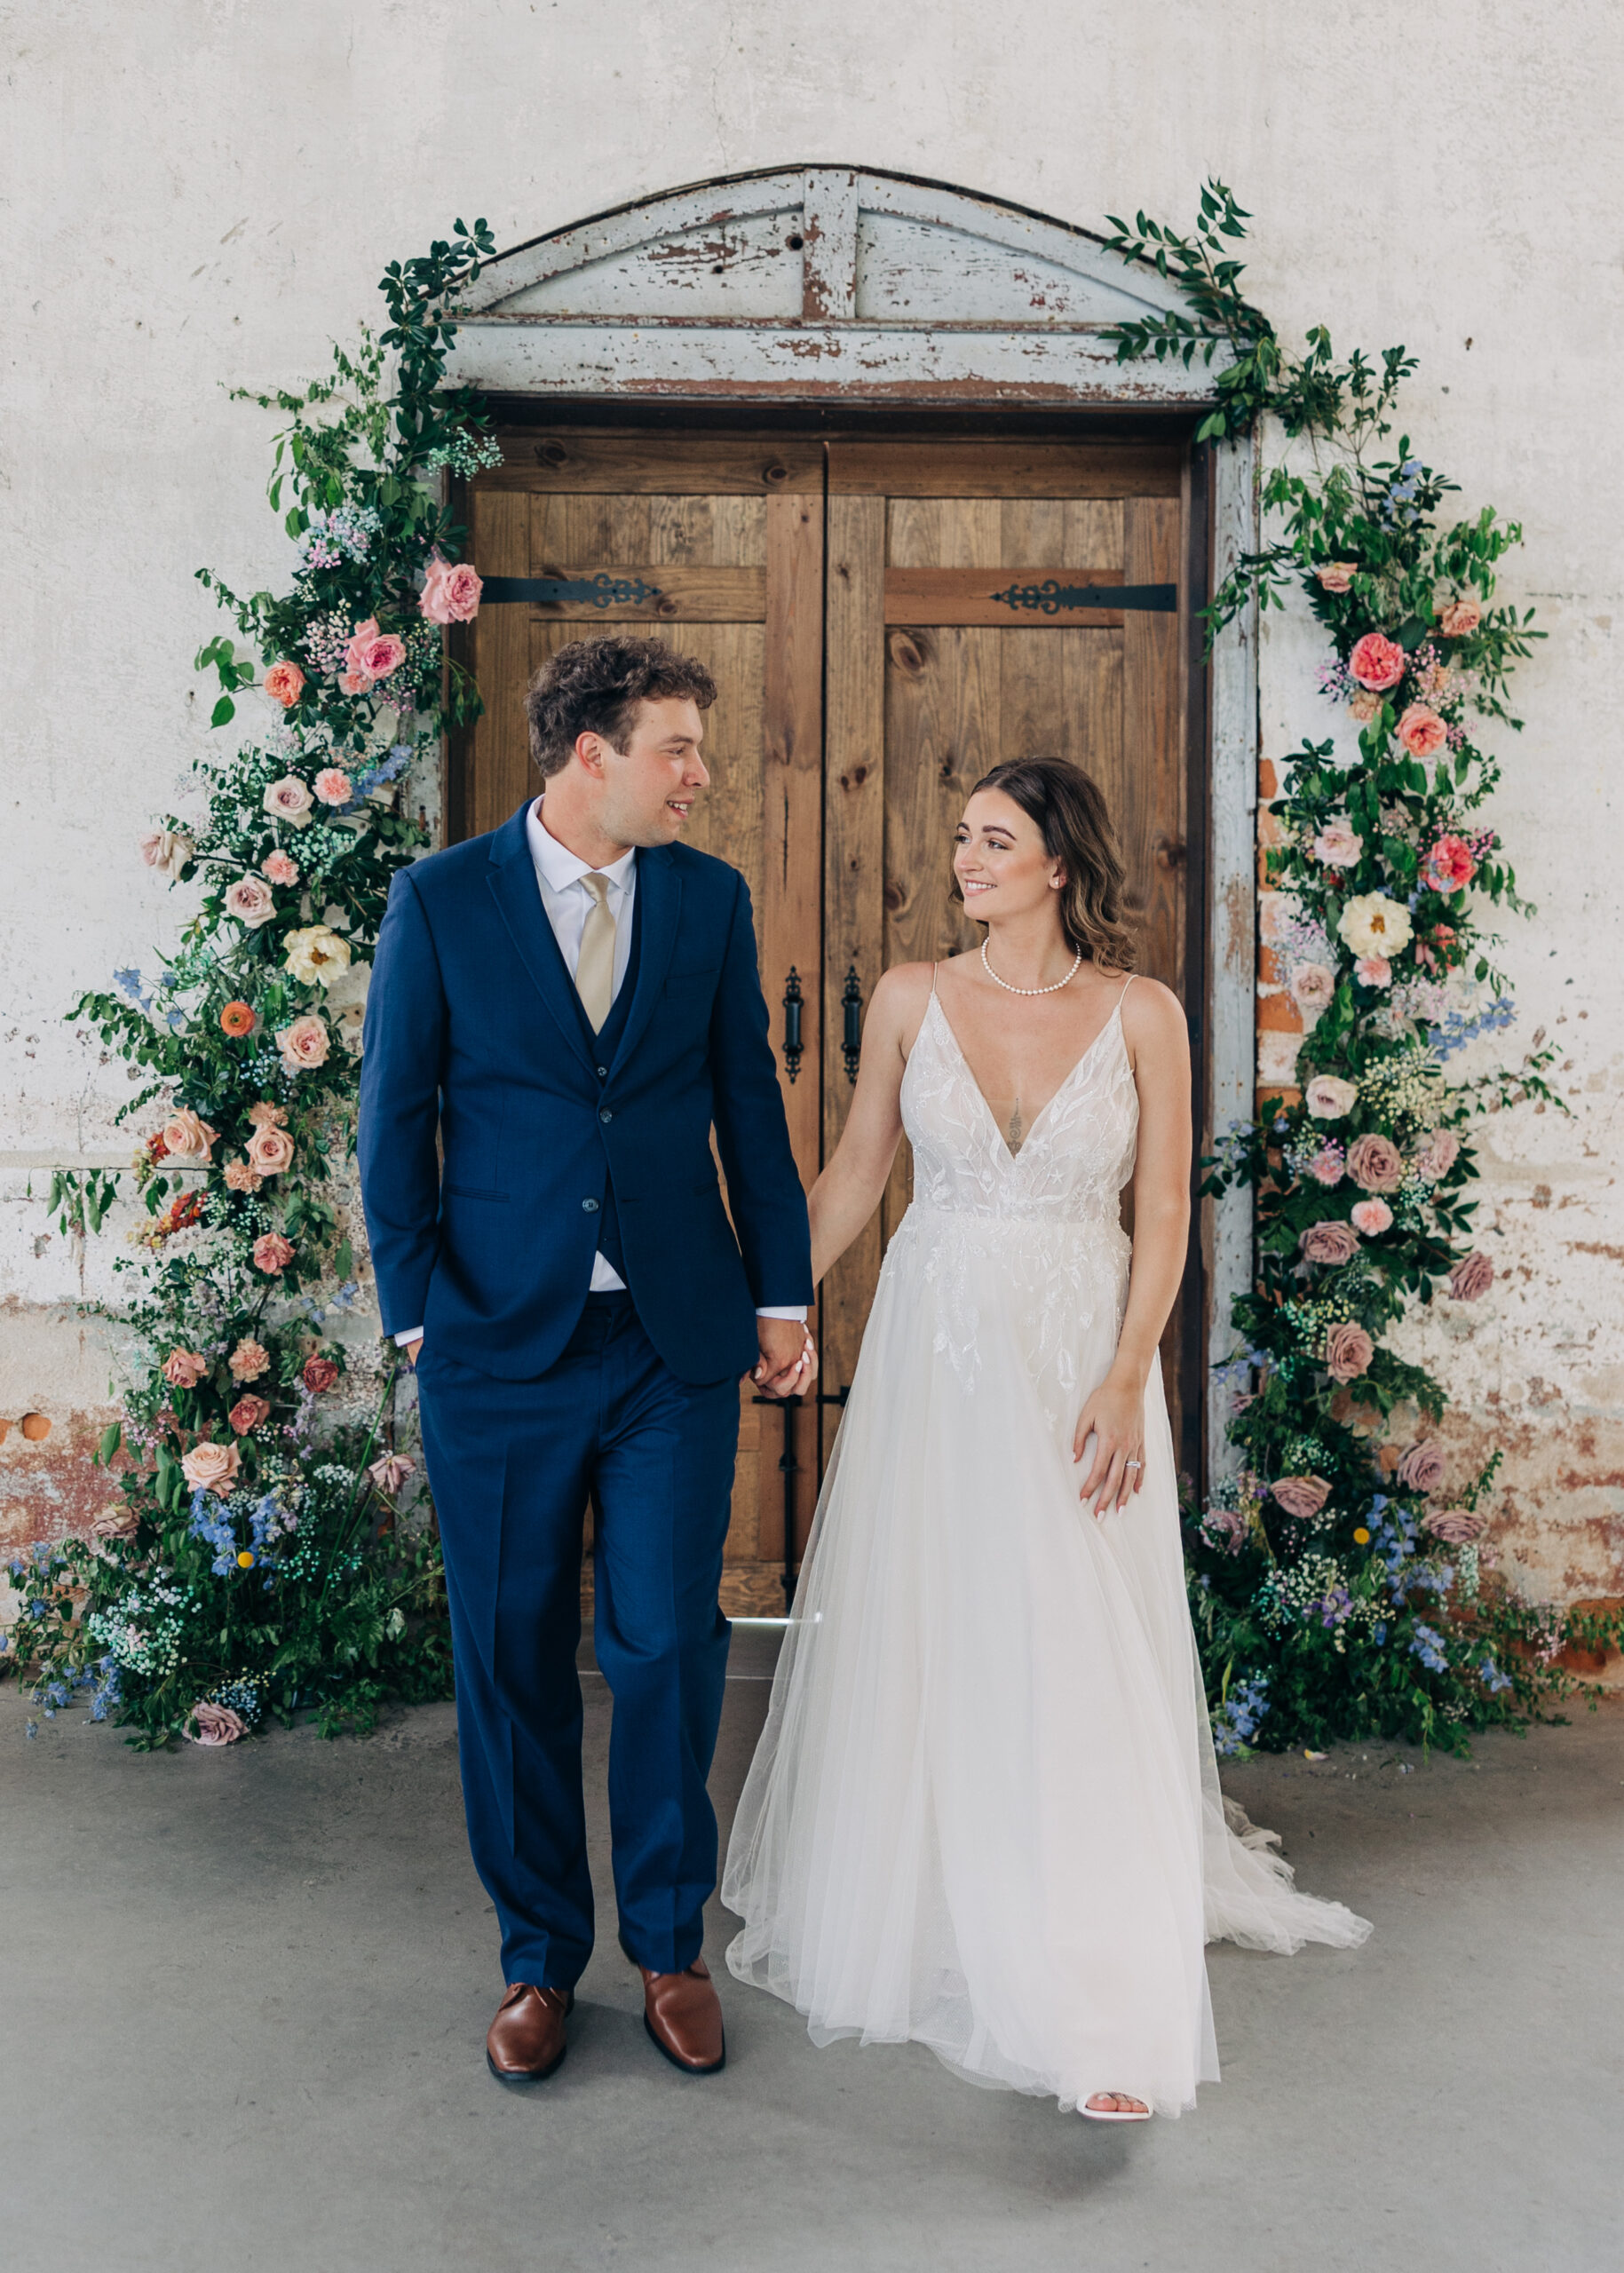 Newlyweds hold hands in front of a large wooden door covered in colorful flowers and walk